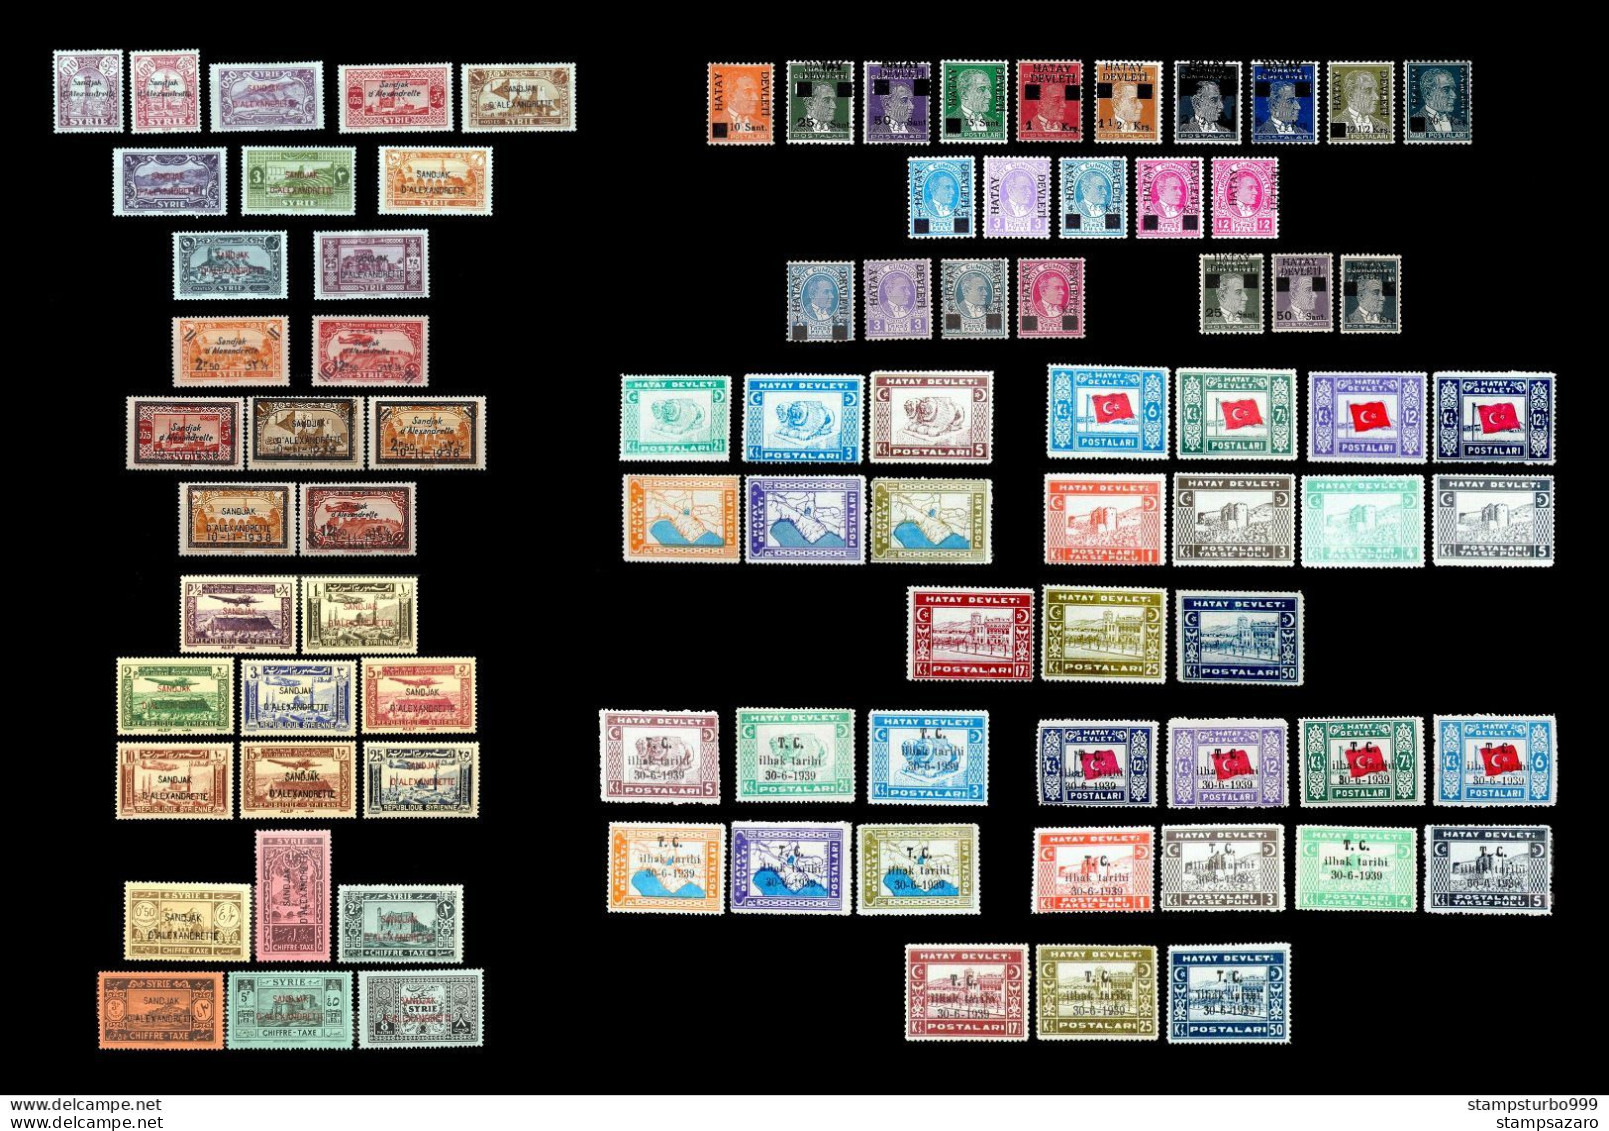 Hatay, Turkey (Alexandretta, Alexandrette,) Complete Sets,(52 Stamps) Hatay Only, MNH ** - Unused Stamps